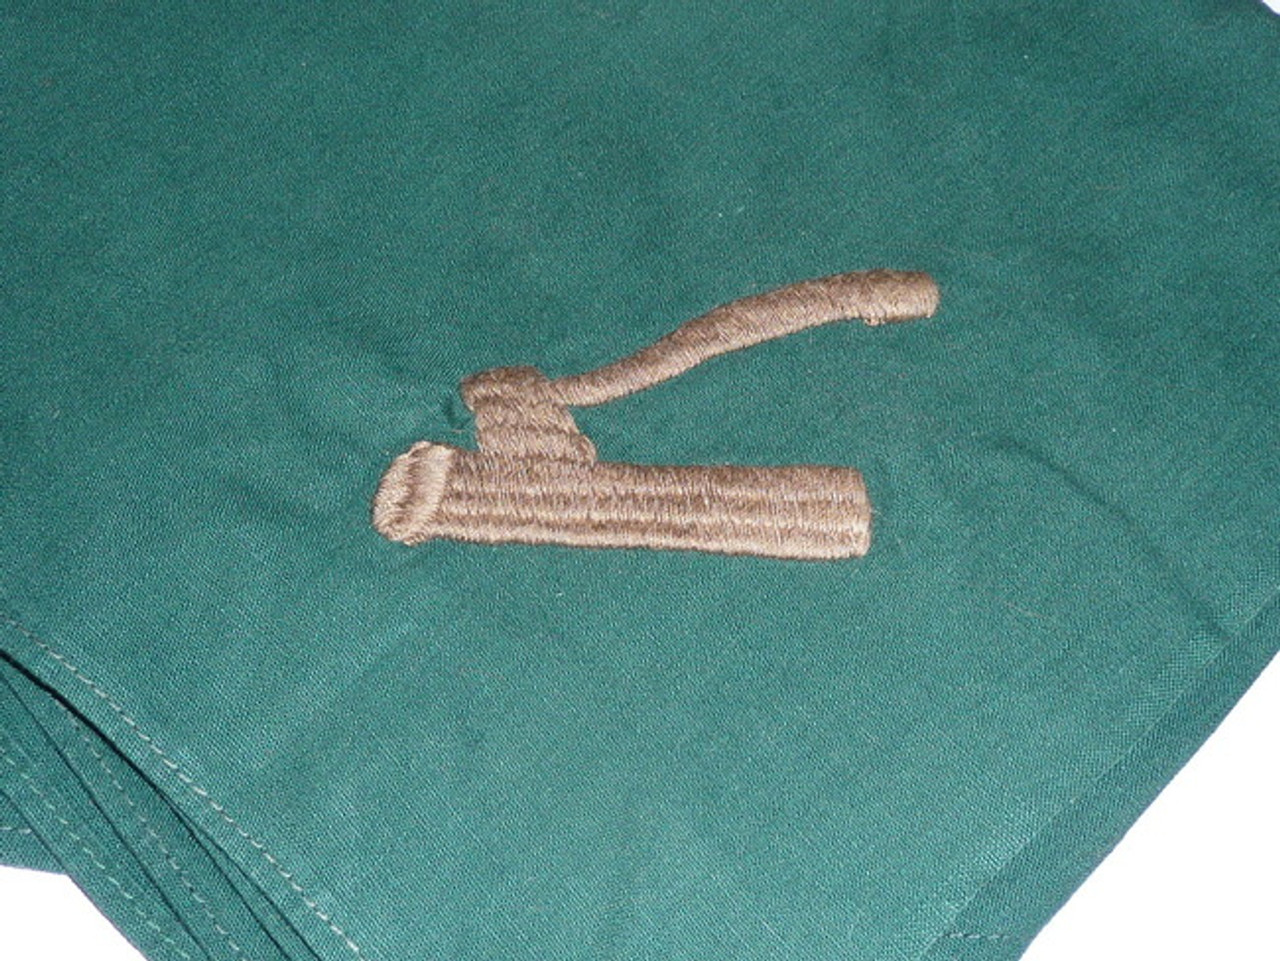 Wood Badge Neckerchief (Axe and Log) Green cloth with tan axe and log